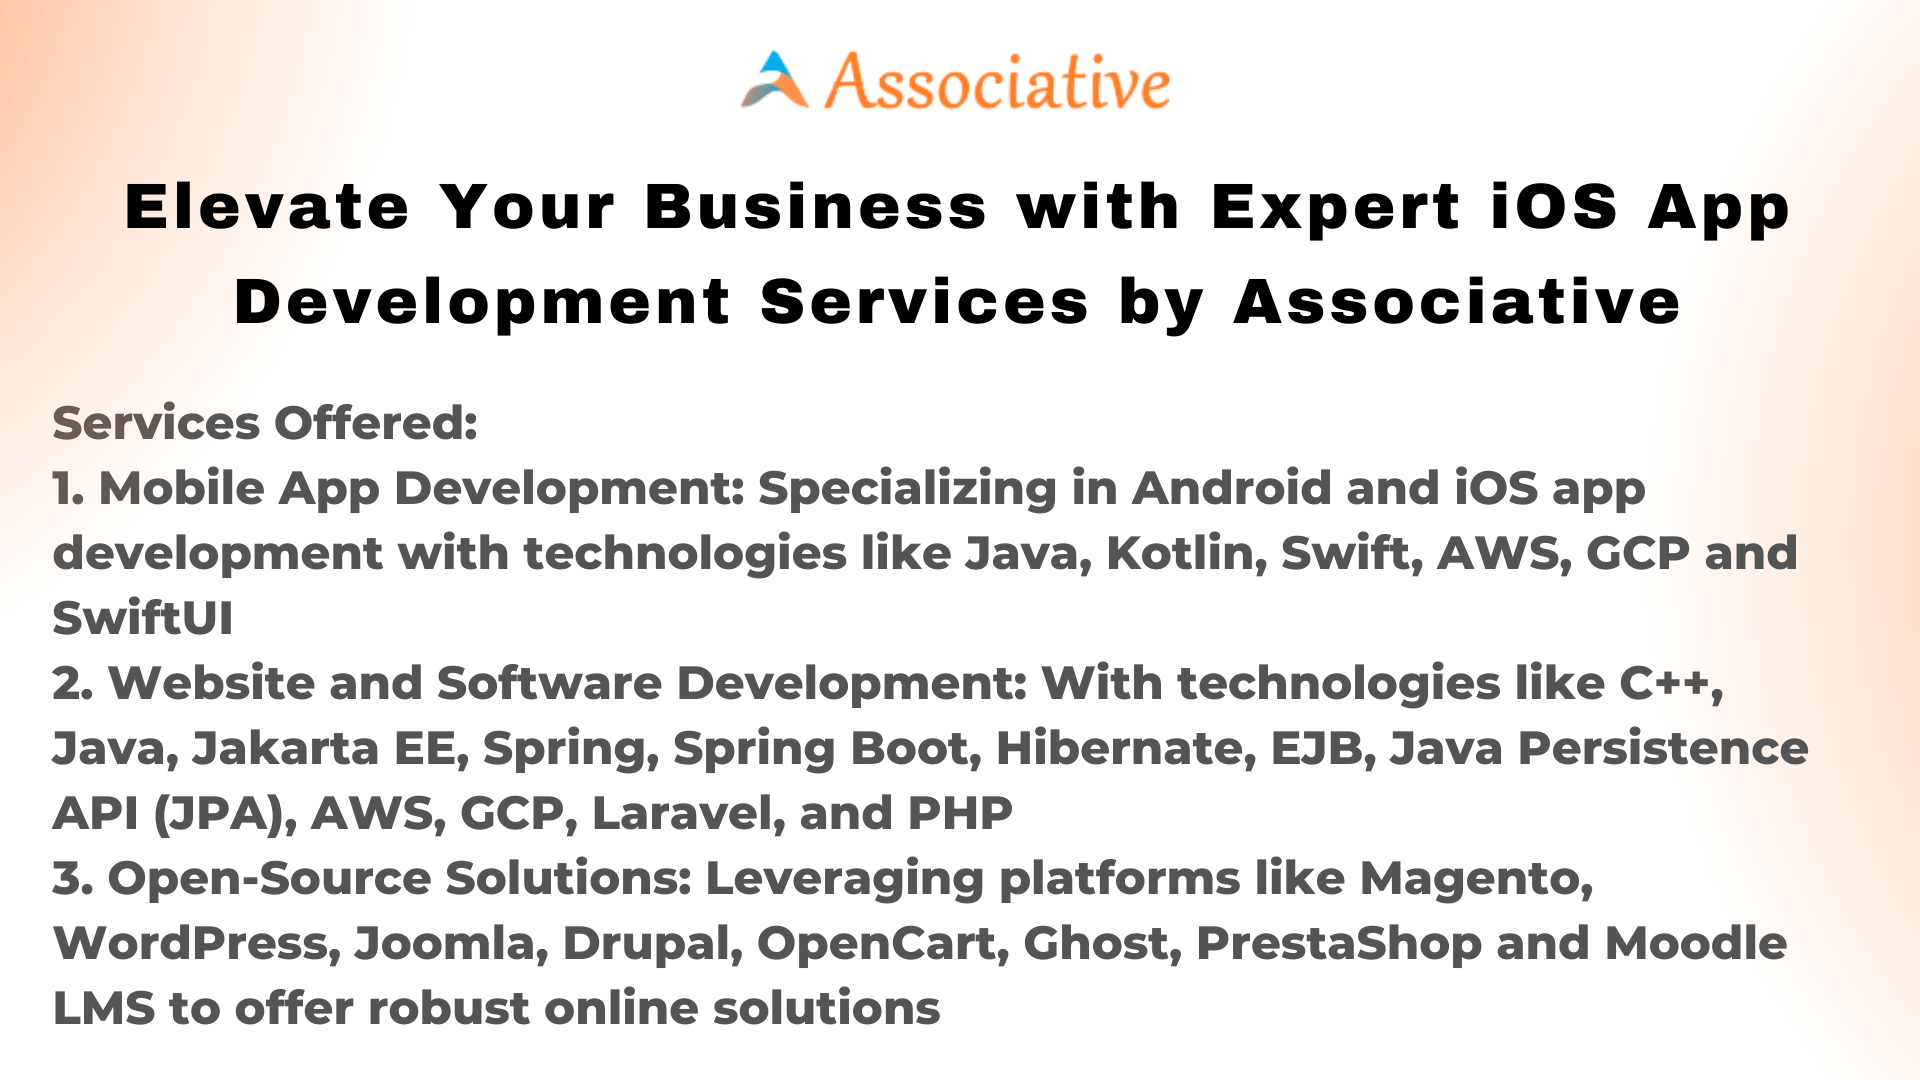 Elevate Your Business with Expert iOS App Development Services by Associative